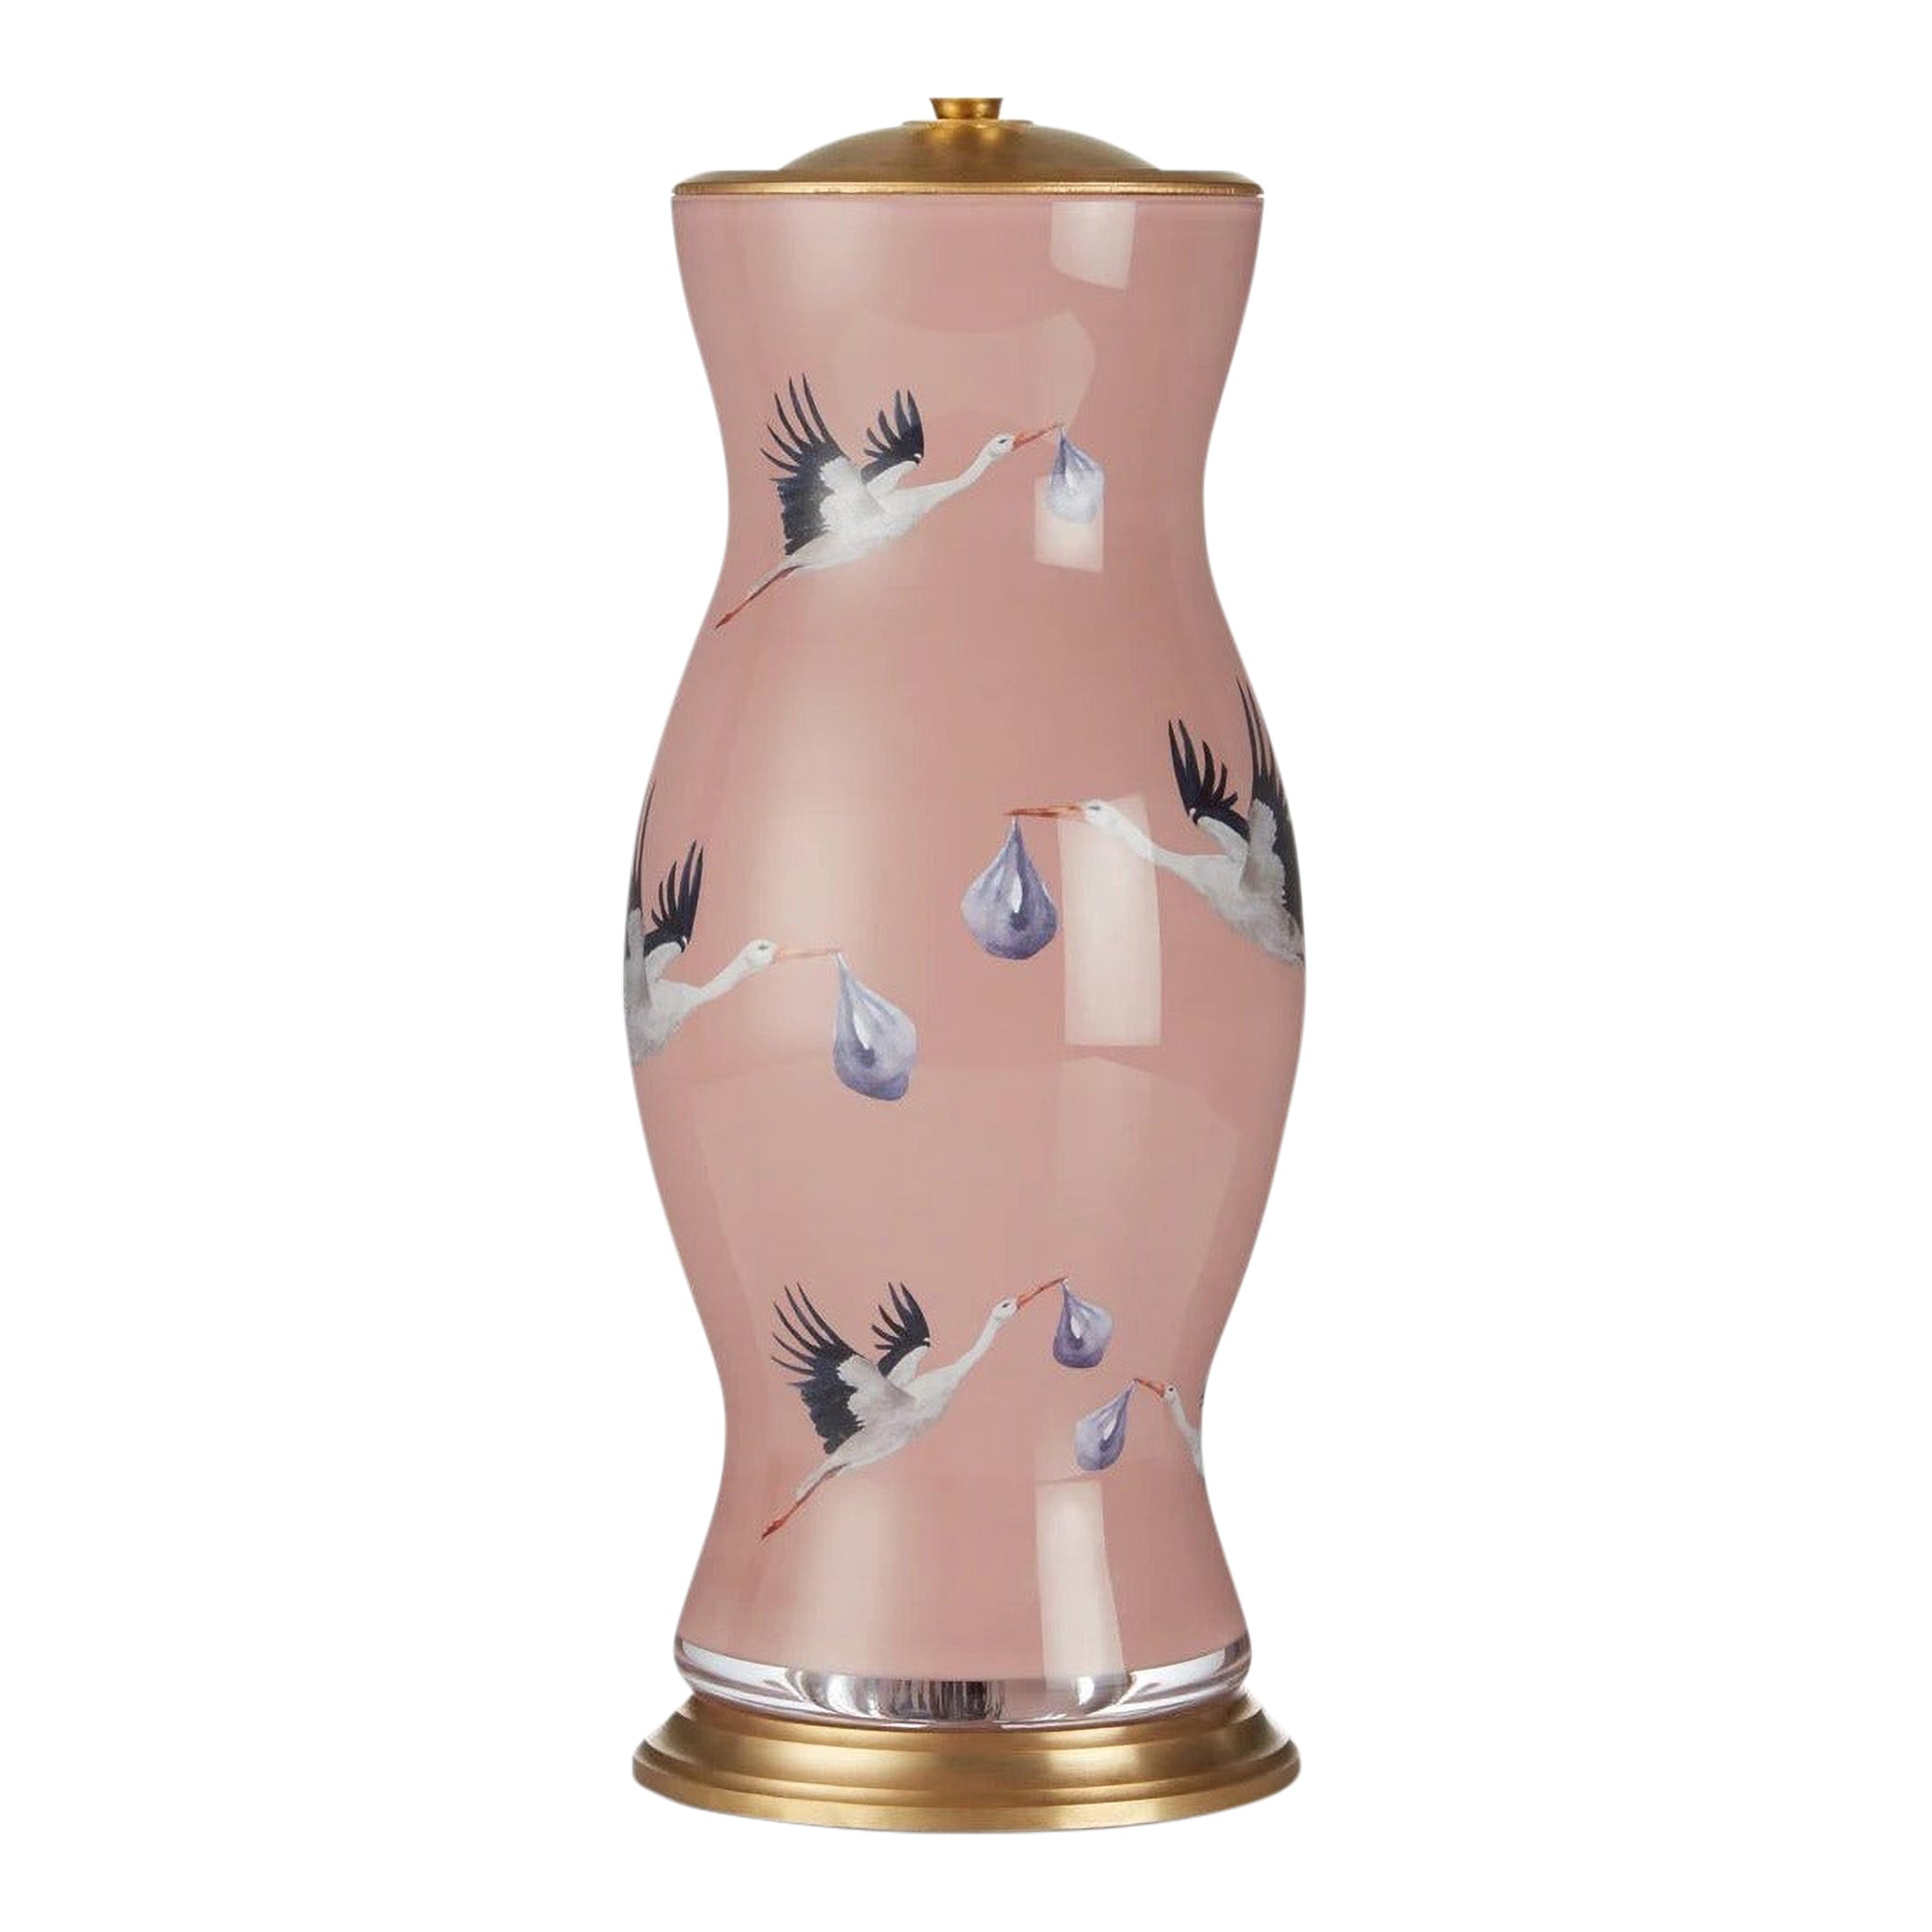 STORKED FOR YOU IN BLUSH PINK LAMP BASE